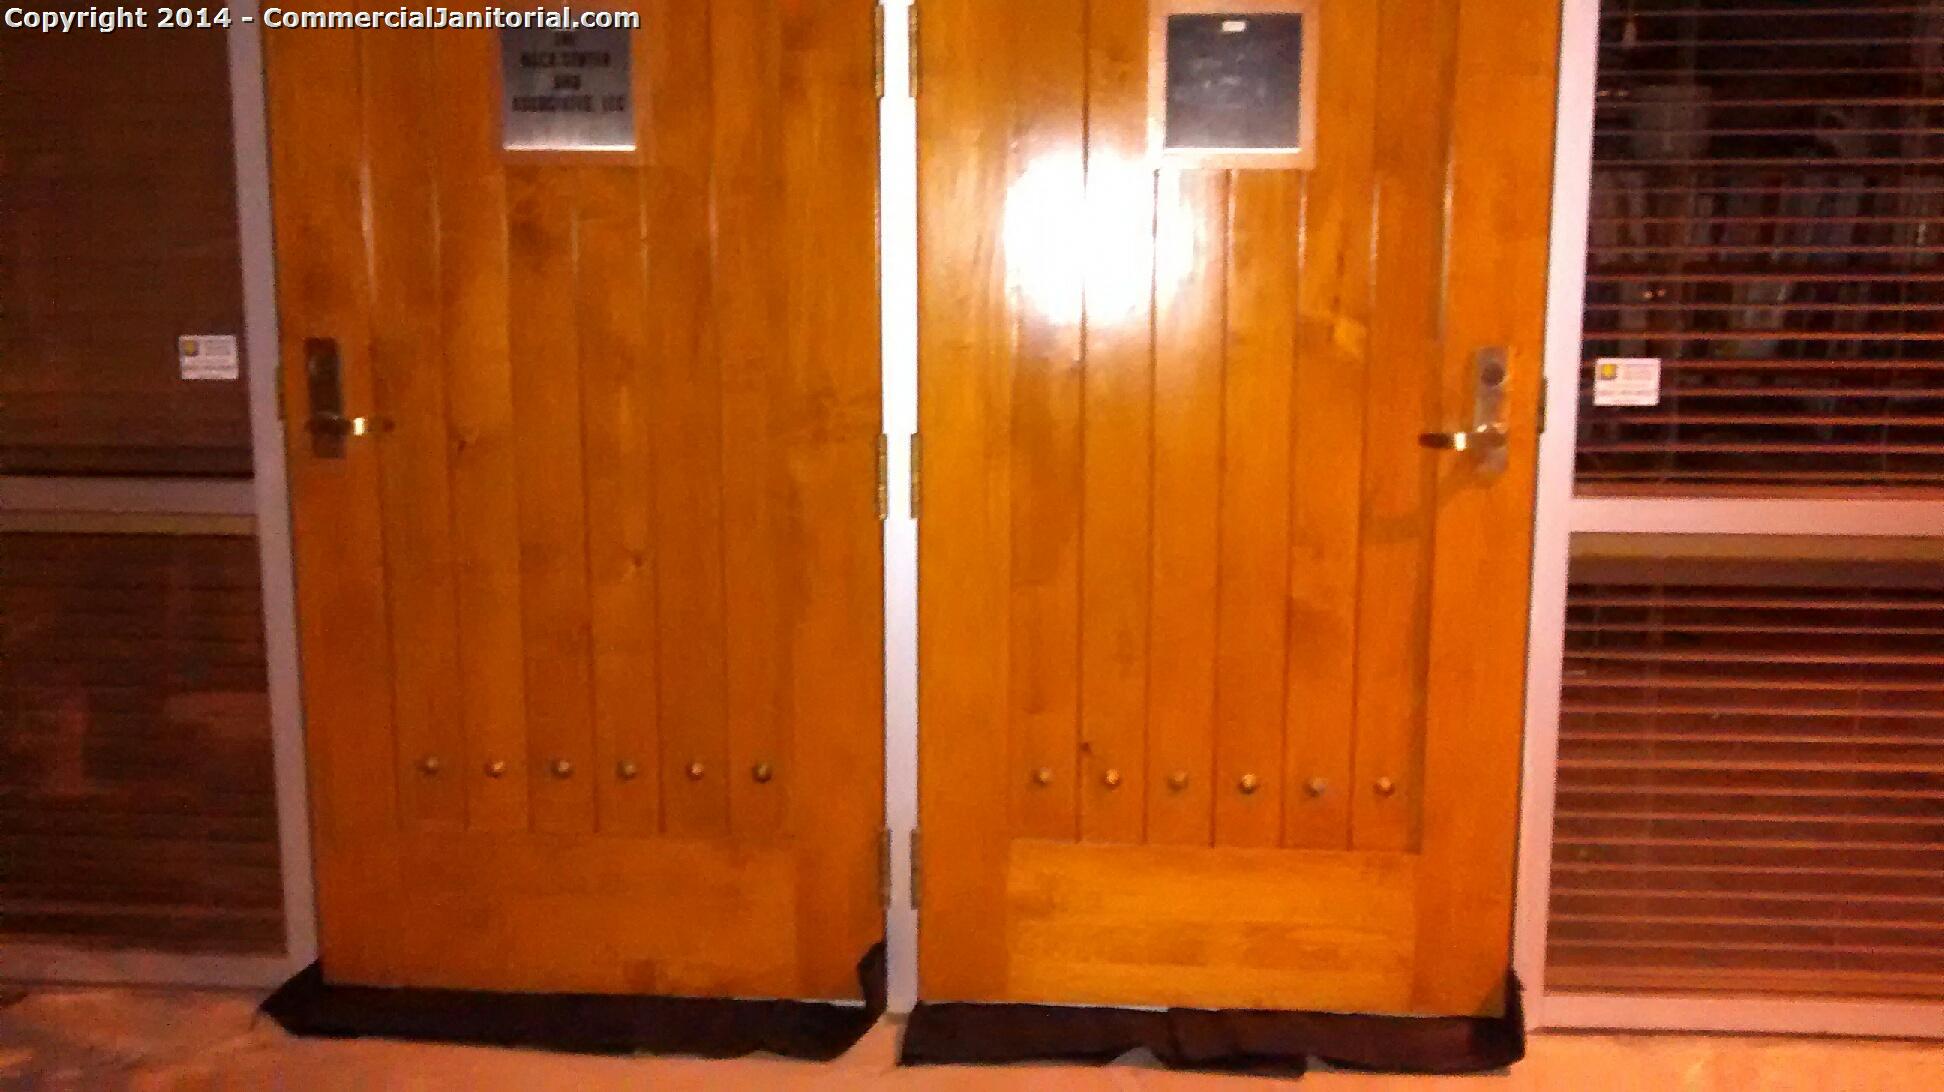 The flood guards were placed under doors client has requested to stop water from entering suites 